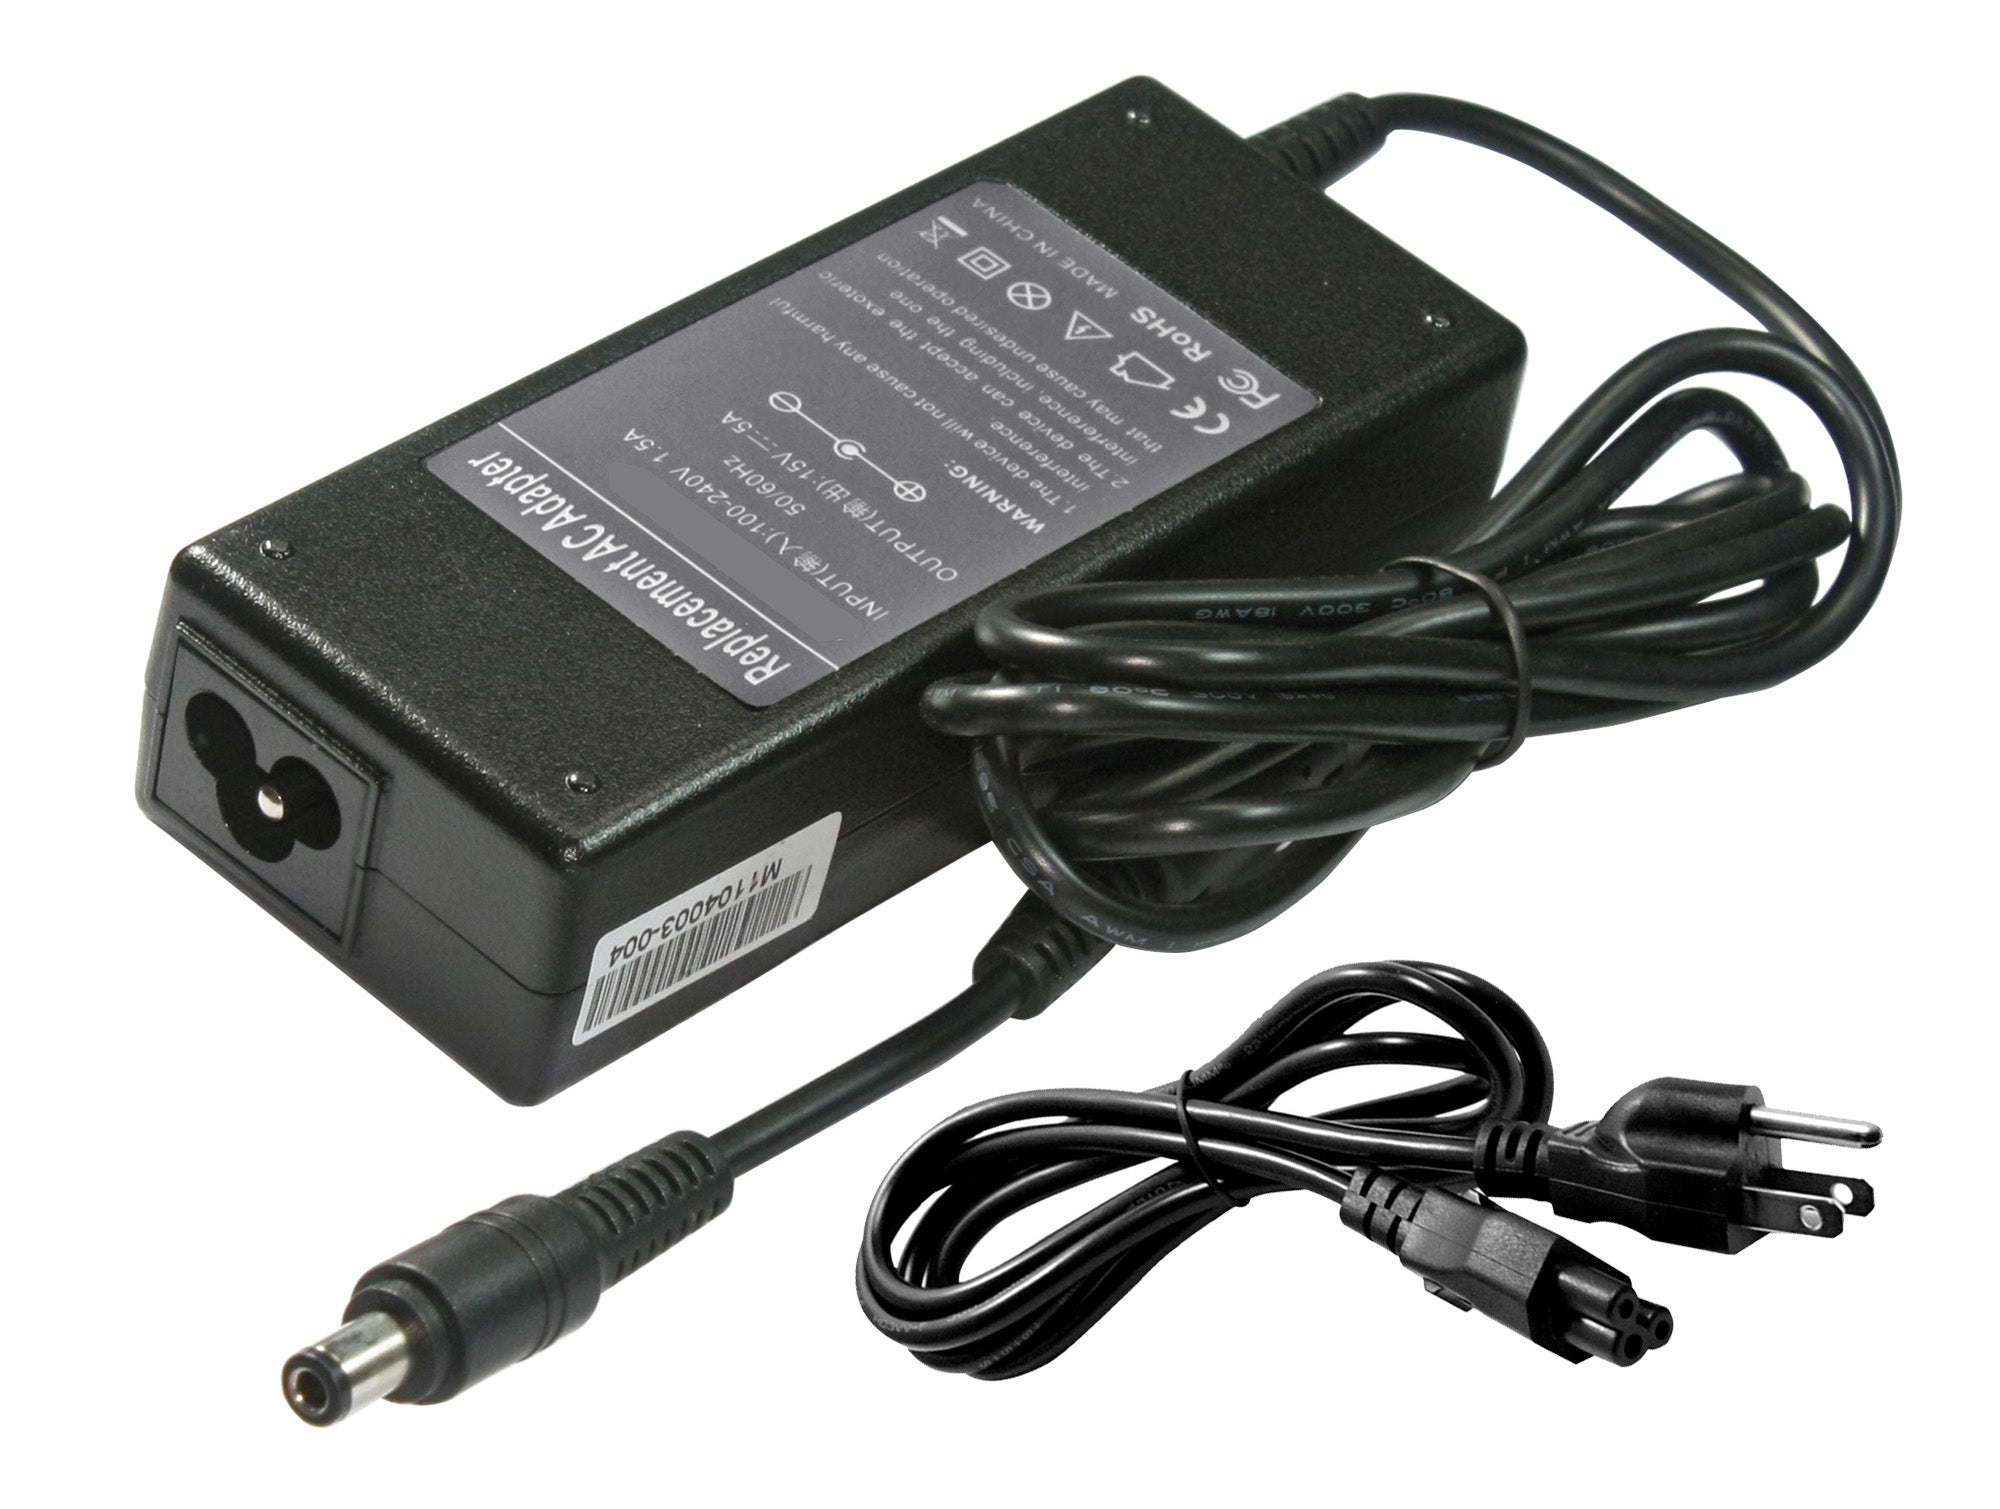 Compatible Replacement Toshiba Satellite A105-S4004 AC Adapter 75Watt 15V 5A.